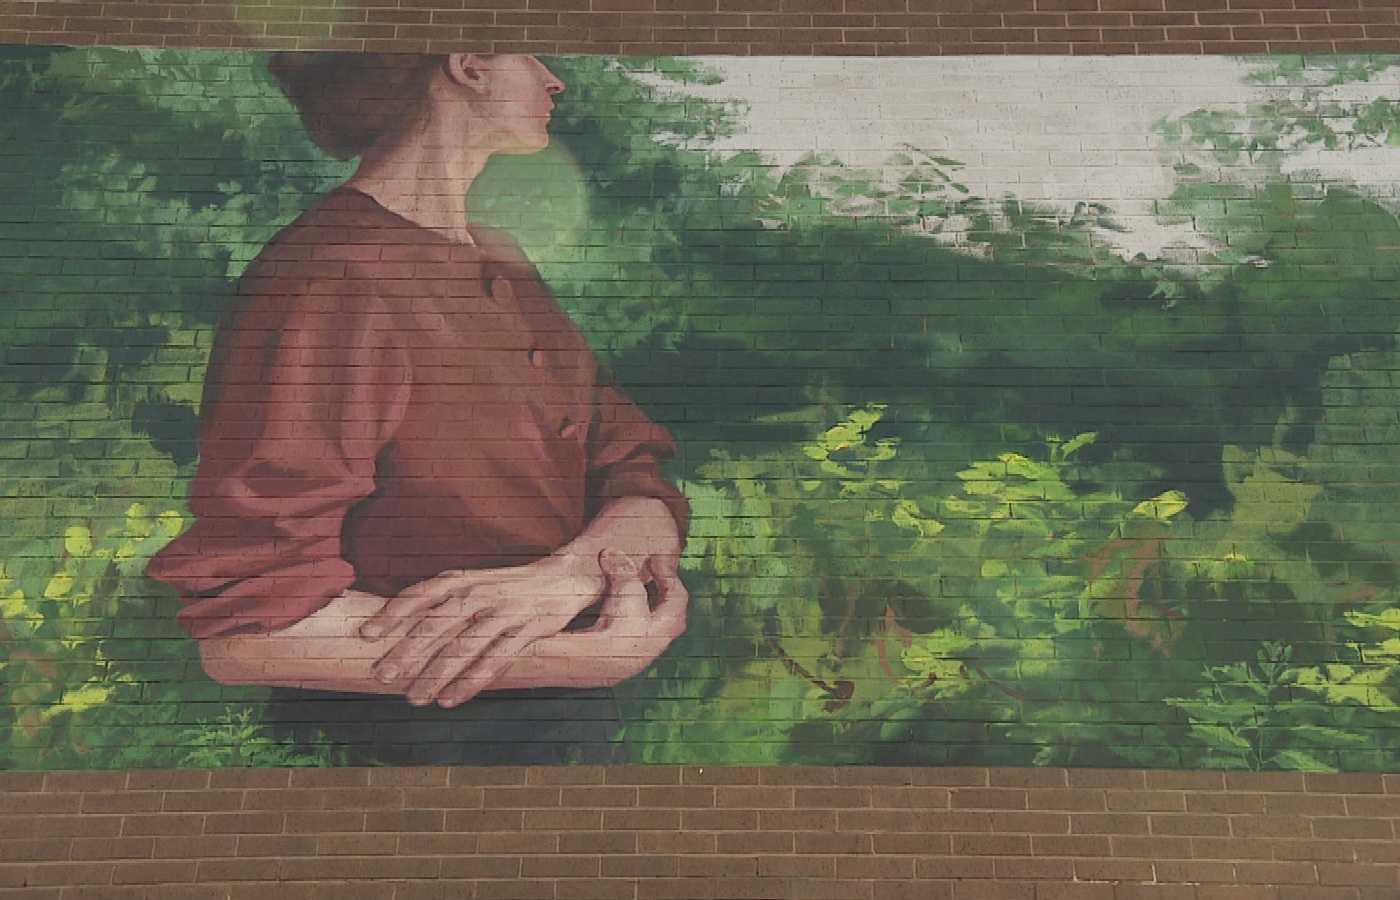 This year 13 artists are transforming some of the city's grey walls into eye-catching art.